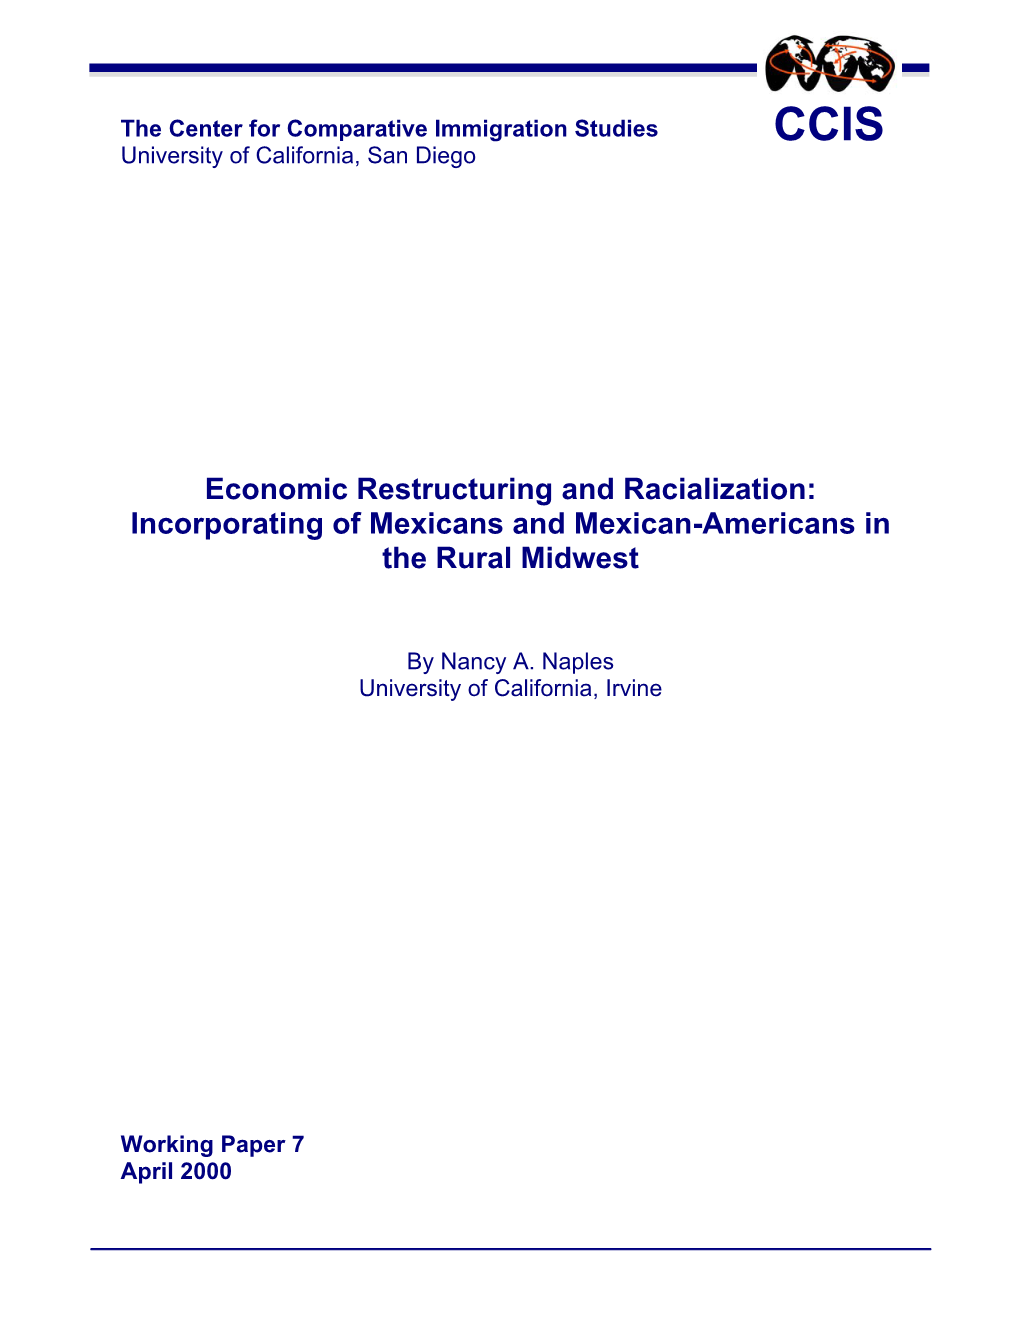 Economic Restructuring and Racialization: Incorporating of Mexicans and Mexican-Americans in the Rural Midwest